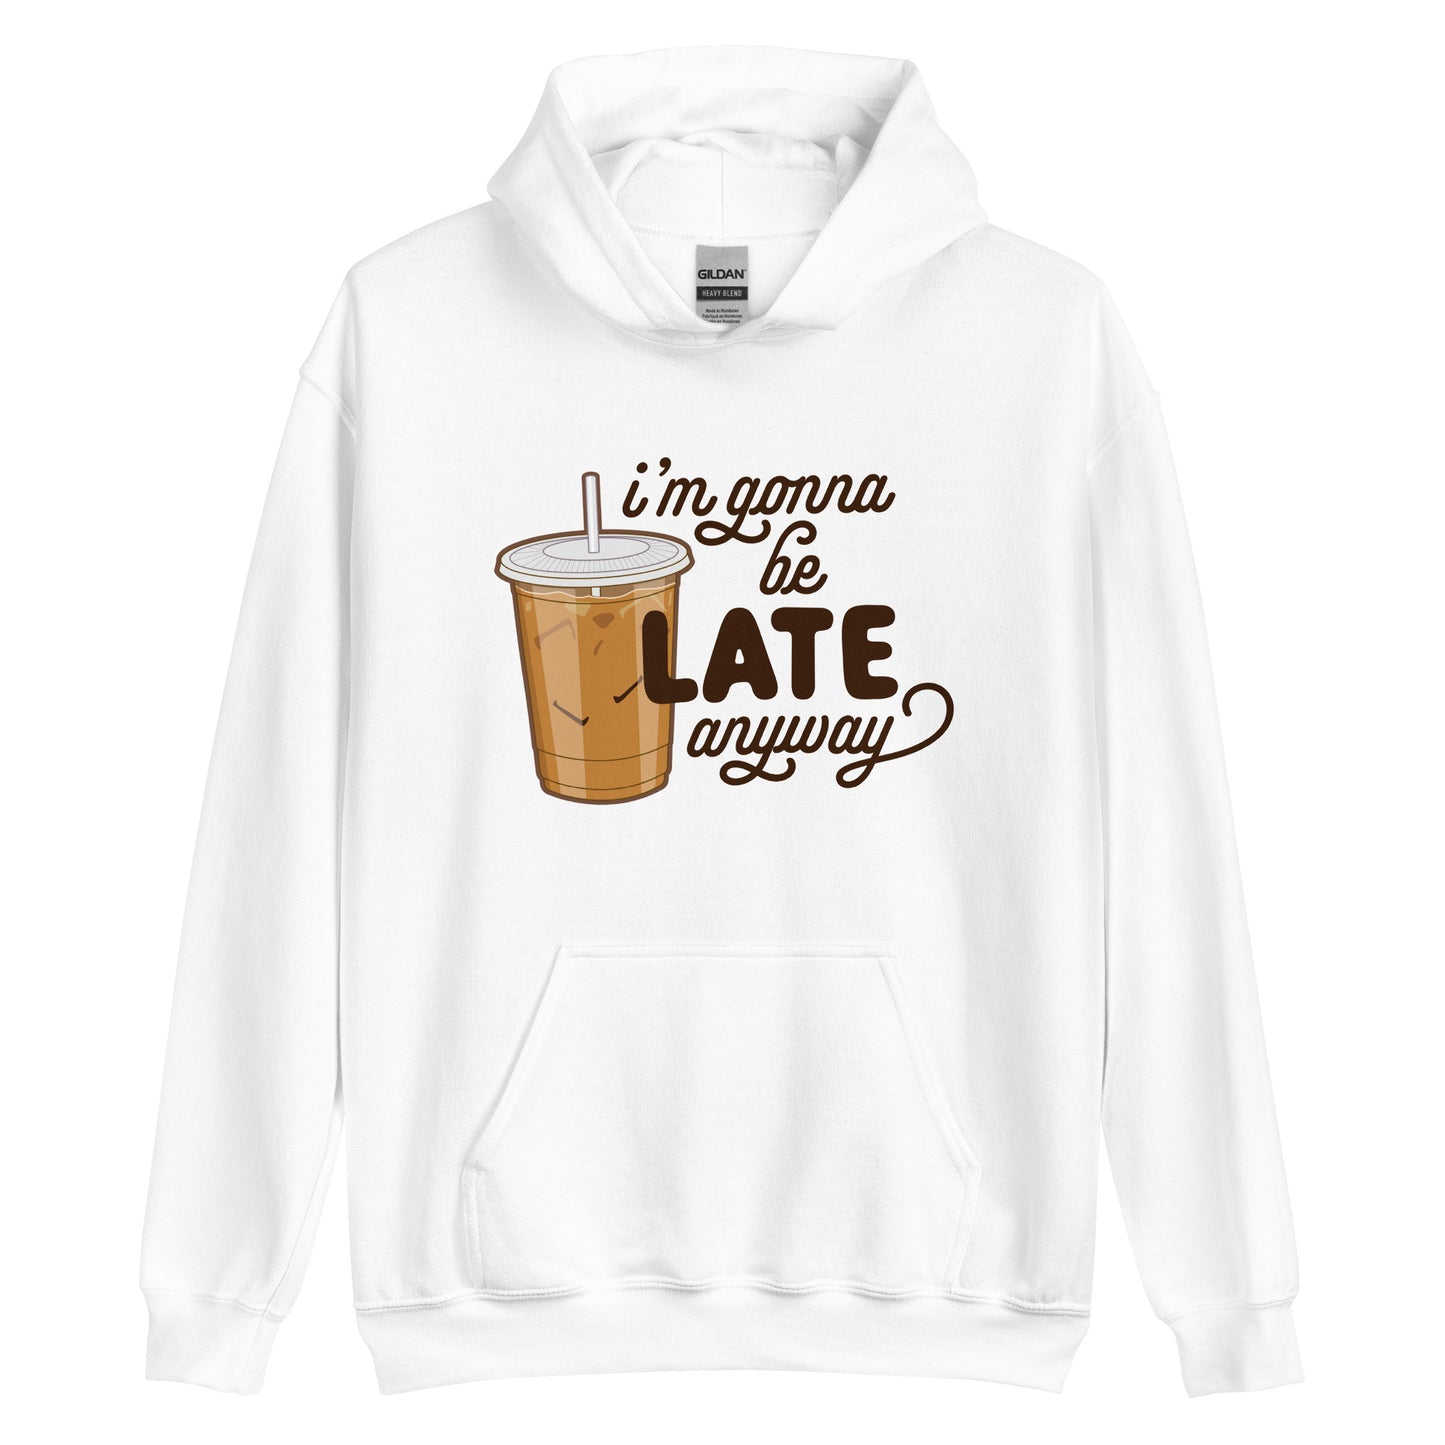 A white hooded sweatshirt featuring an illustration of iced coffee. Text next to the coffee reads "I'm gonna be LATE anyway".